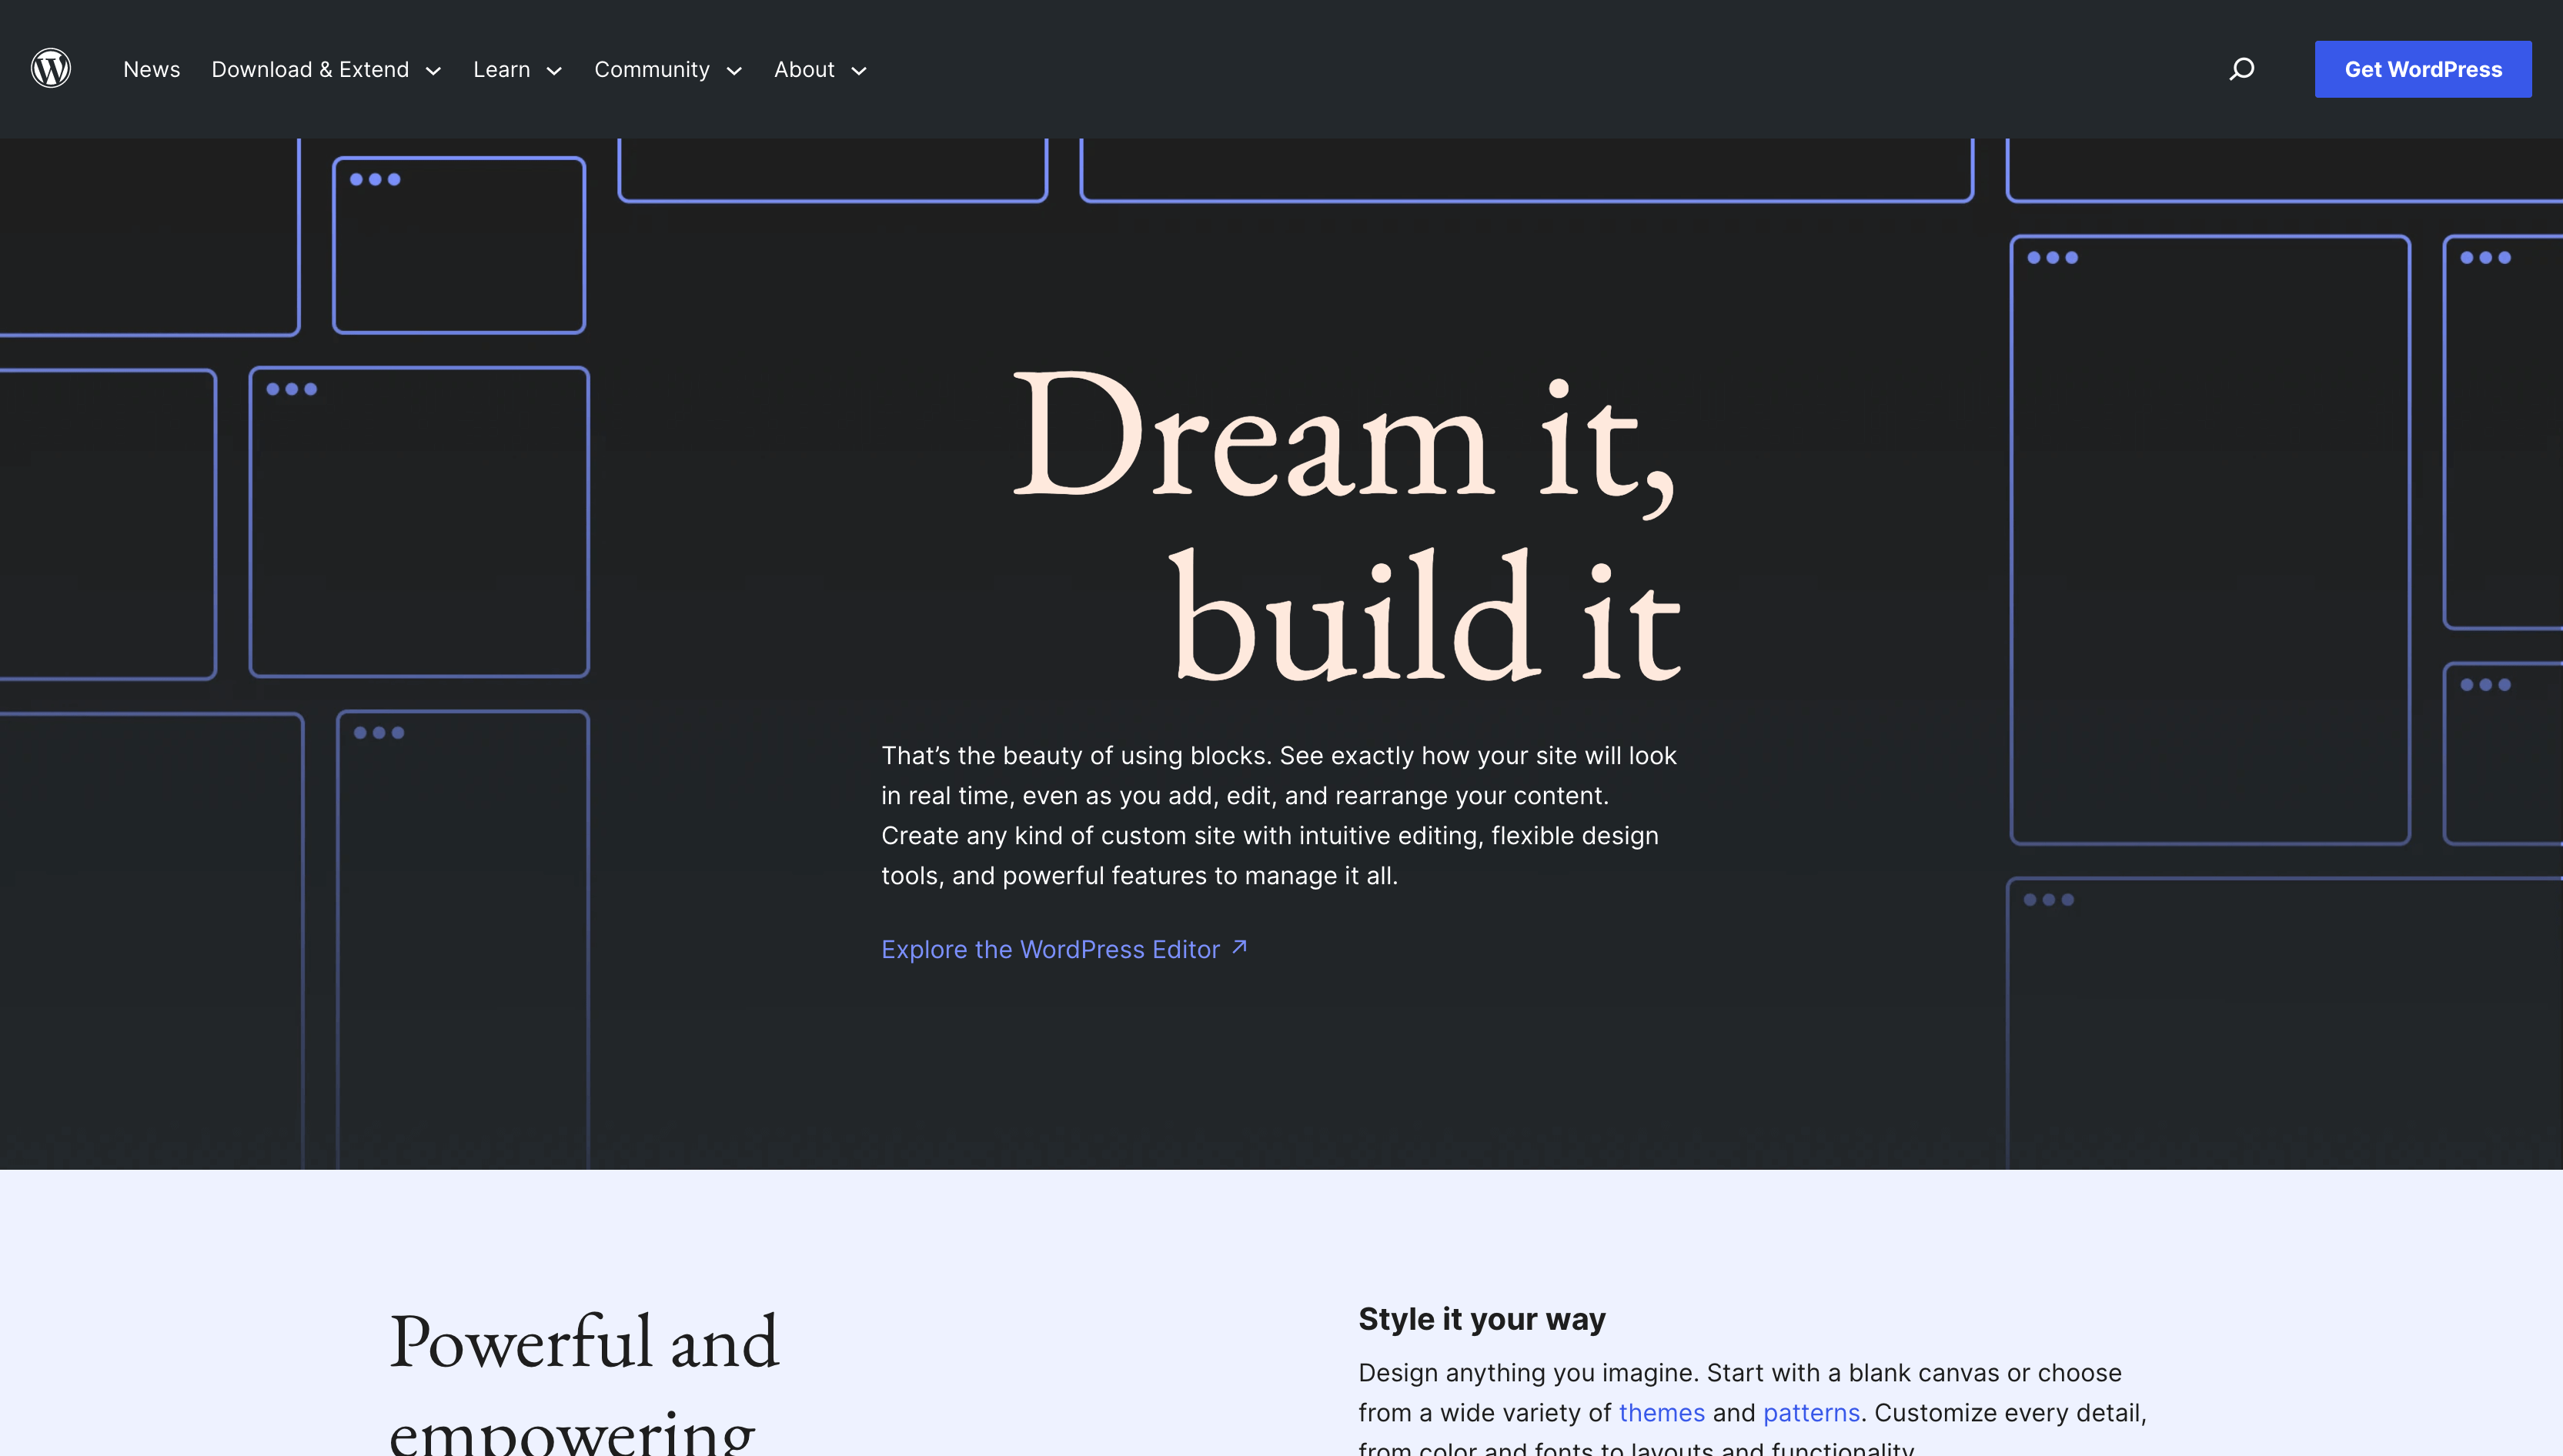 A screenshot of the wordpress.org page. Main title text is "Dream it, build it"